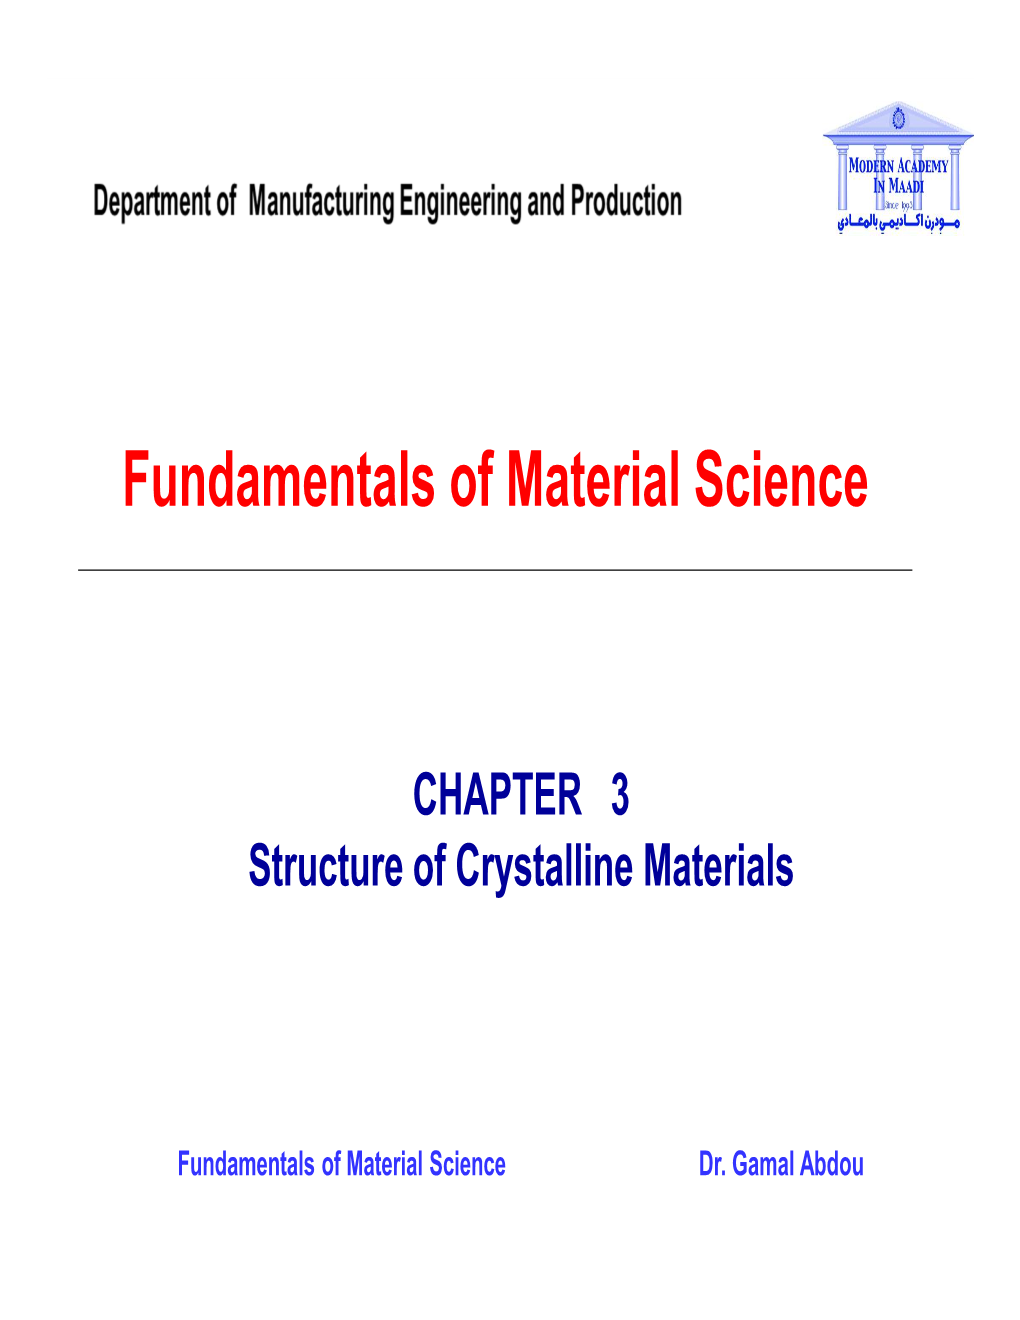 3- Structure of Crystalline Materials